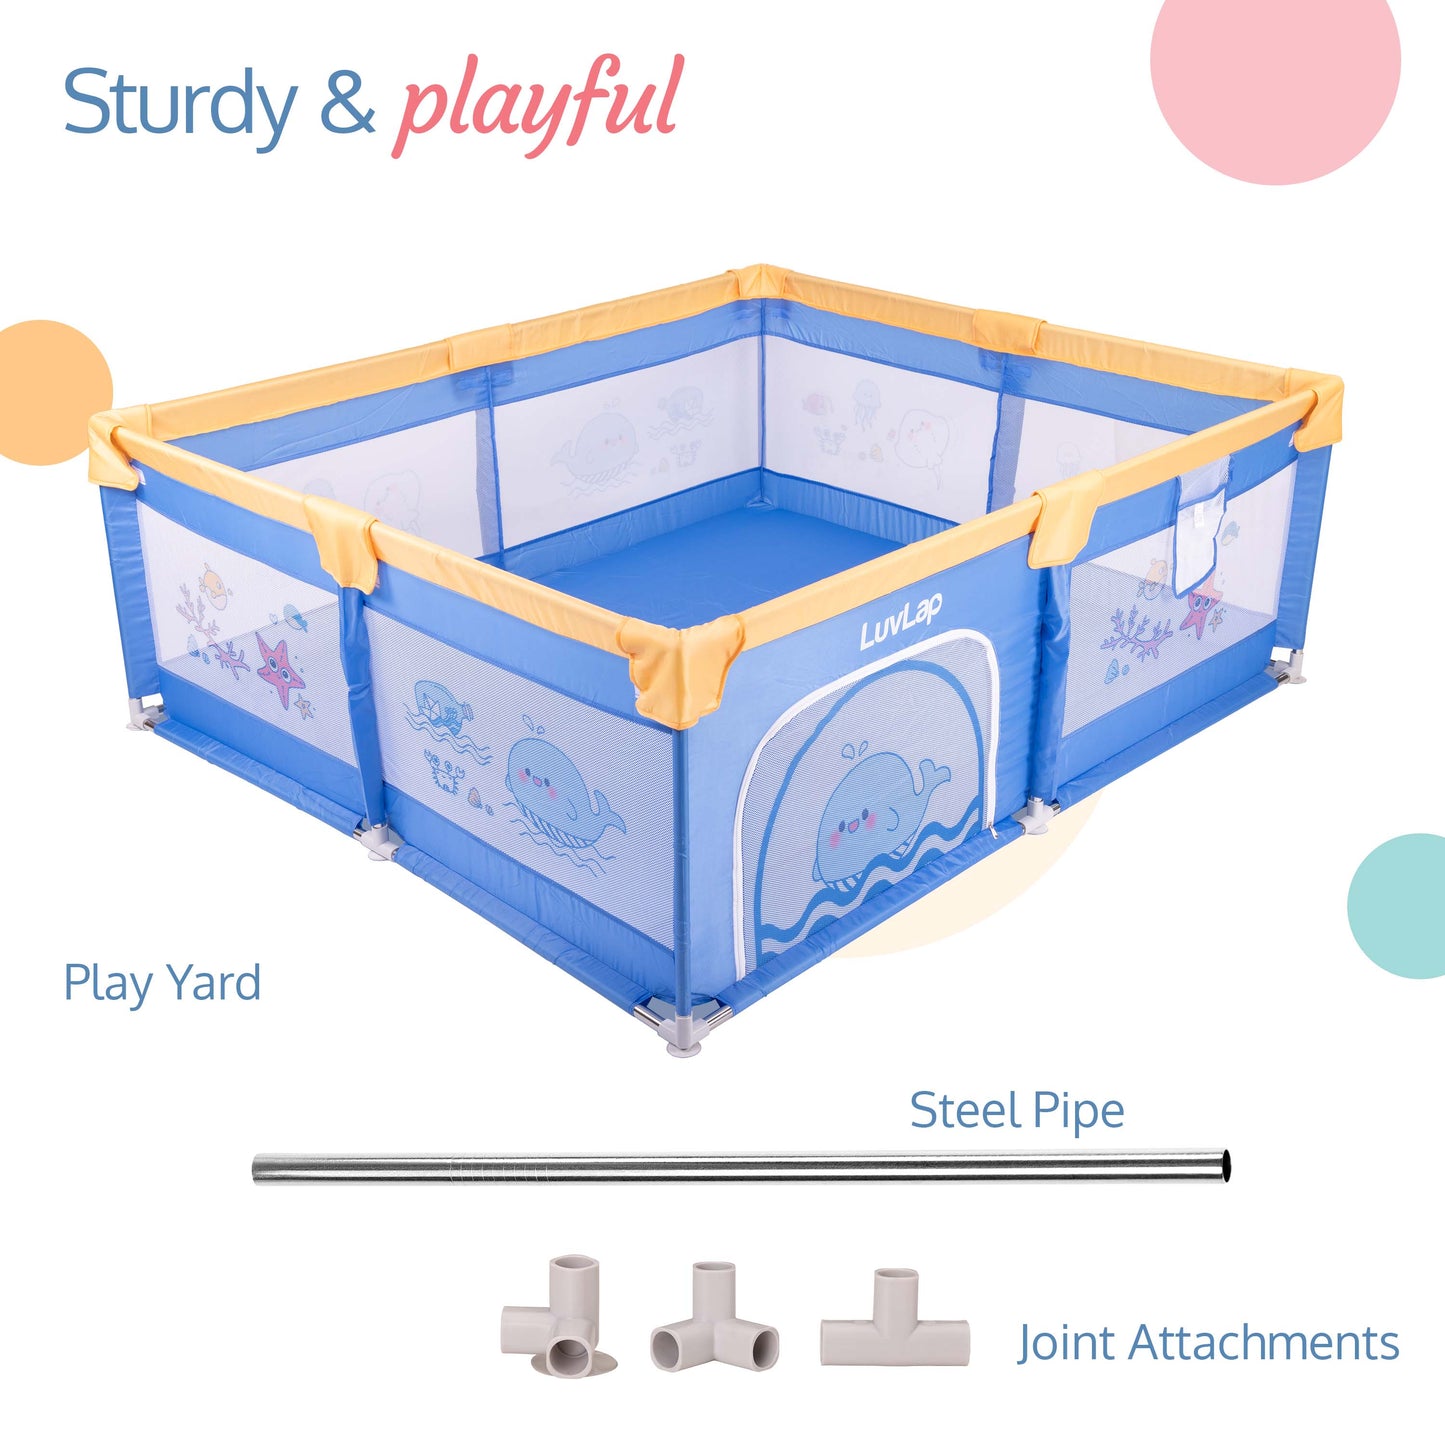 Large Baby Playpen, Baby Playard, Baby Play Yard, Play Pens for Babies and Toddlers, BPA - Free, Non - Toxic, Easy assembly, sturdy & stable, 180cm x 150cm (Blue & Yellow)